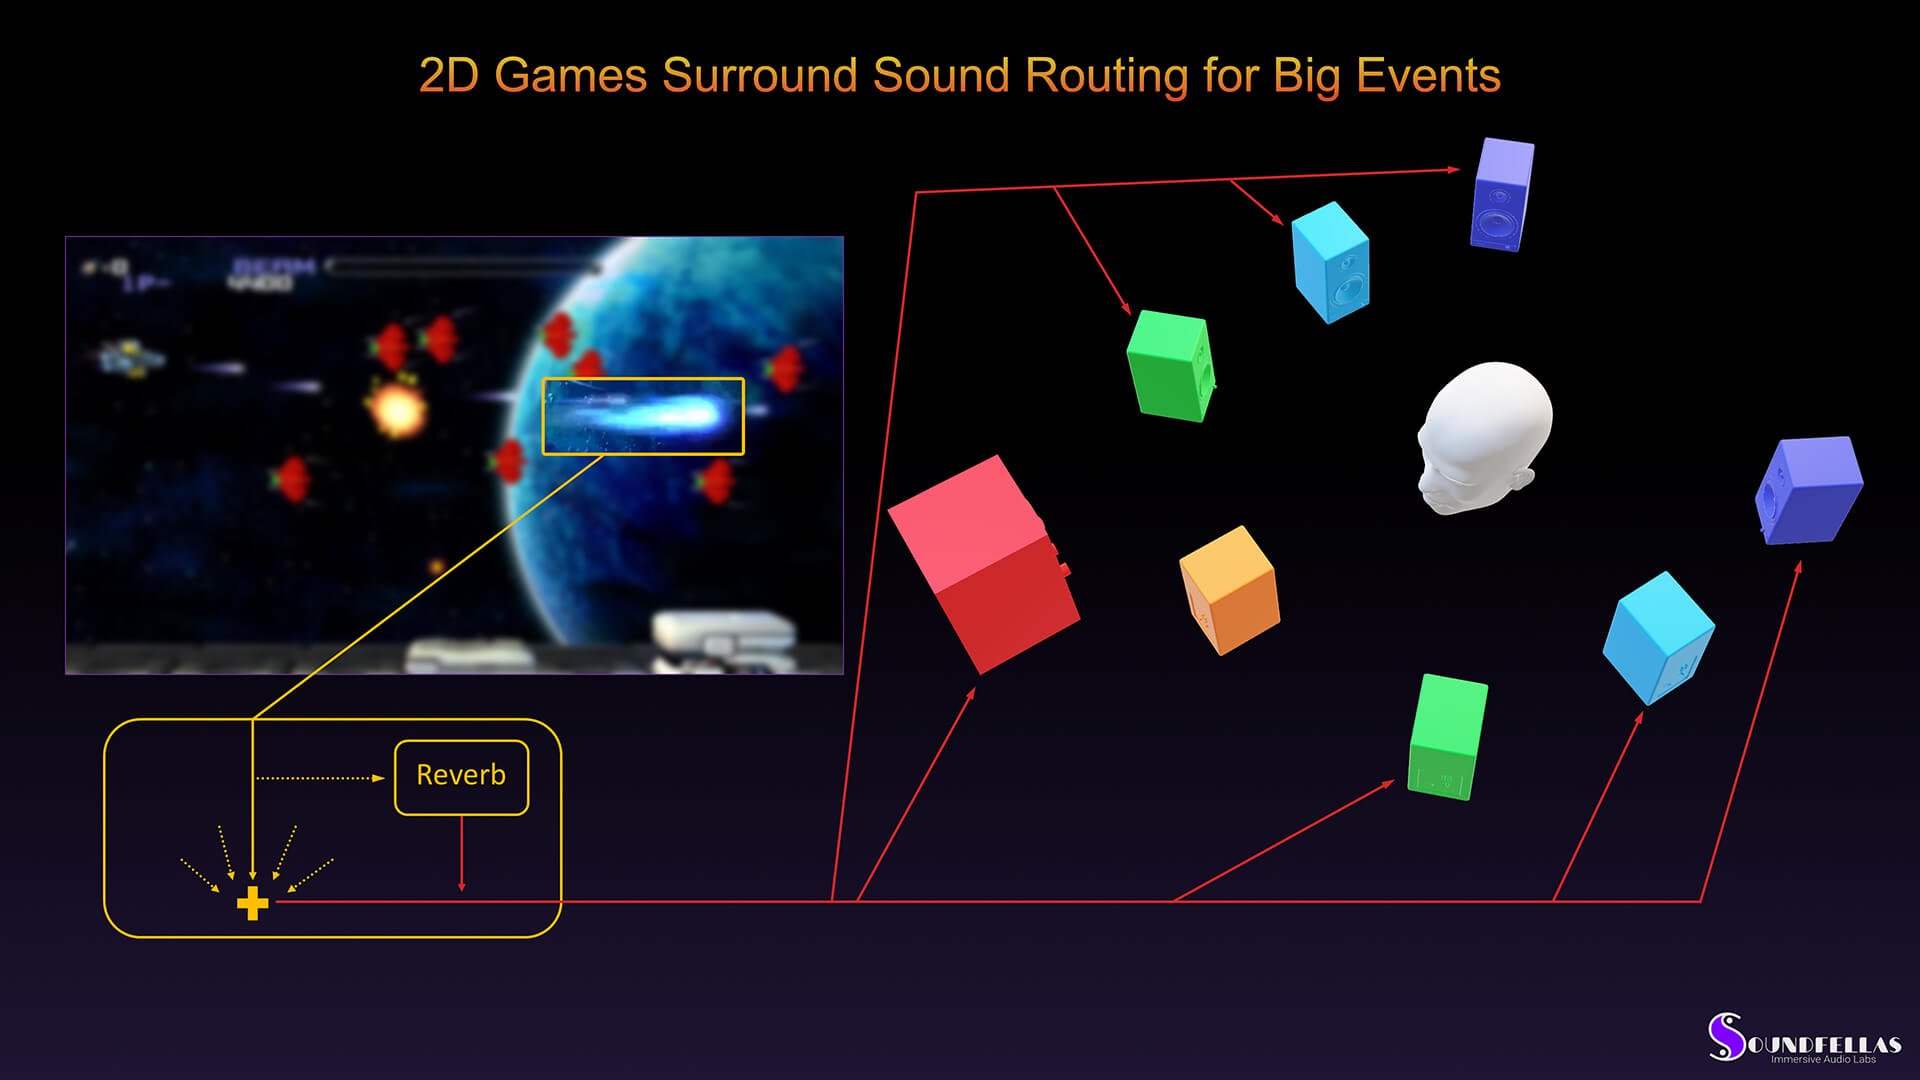 Image of 2D game surround sound routing for big events.